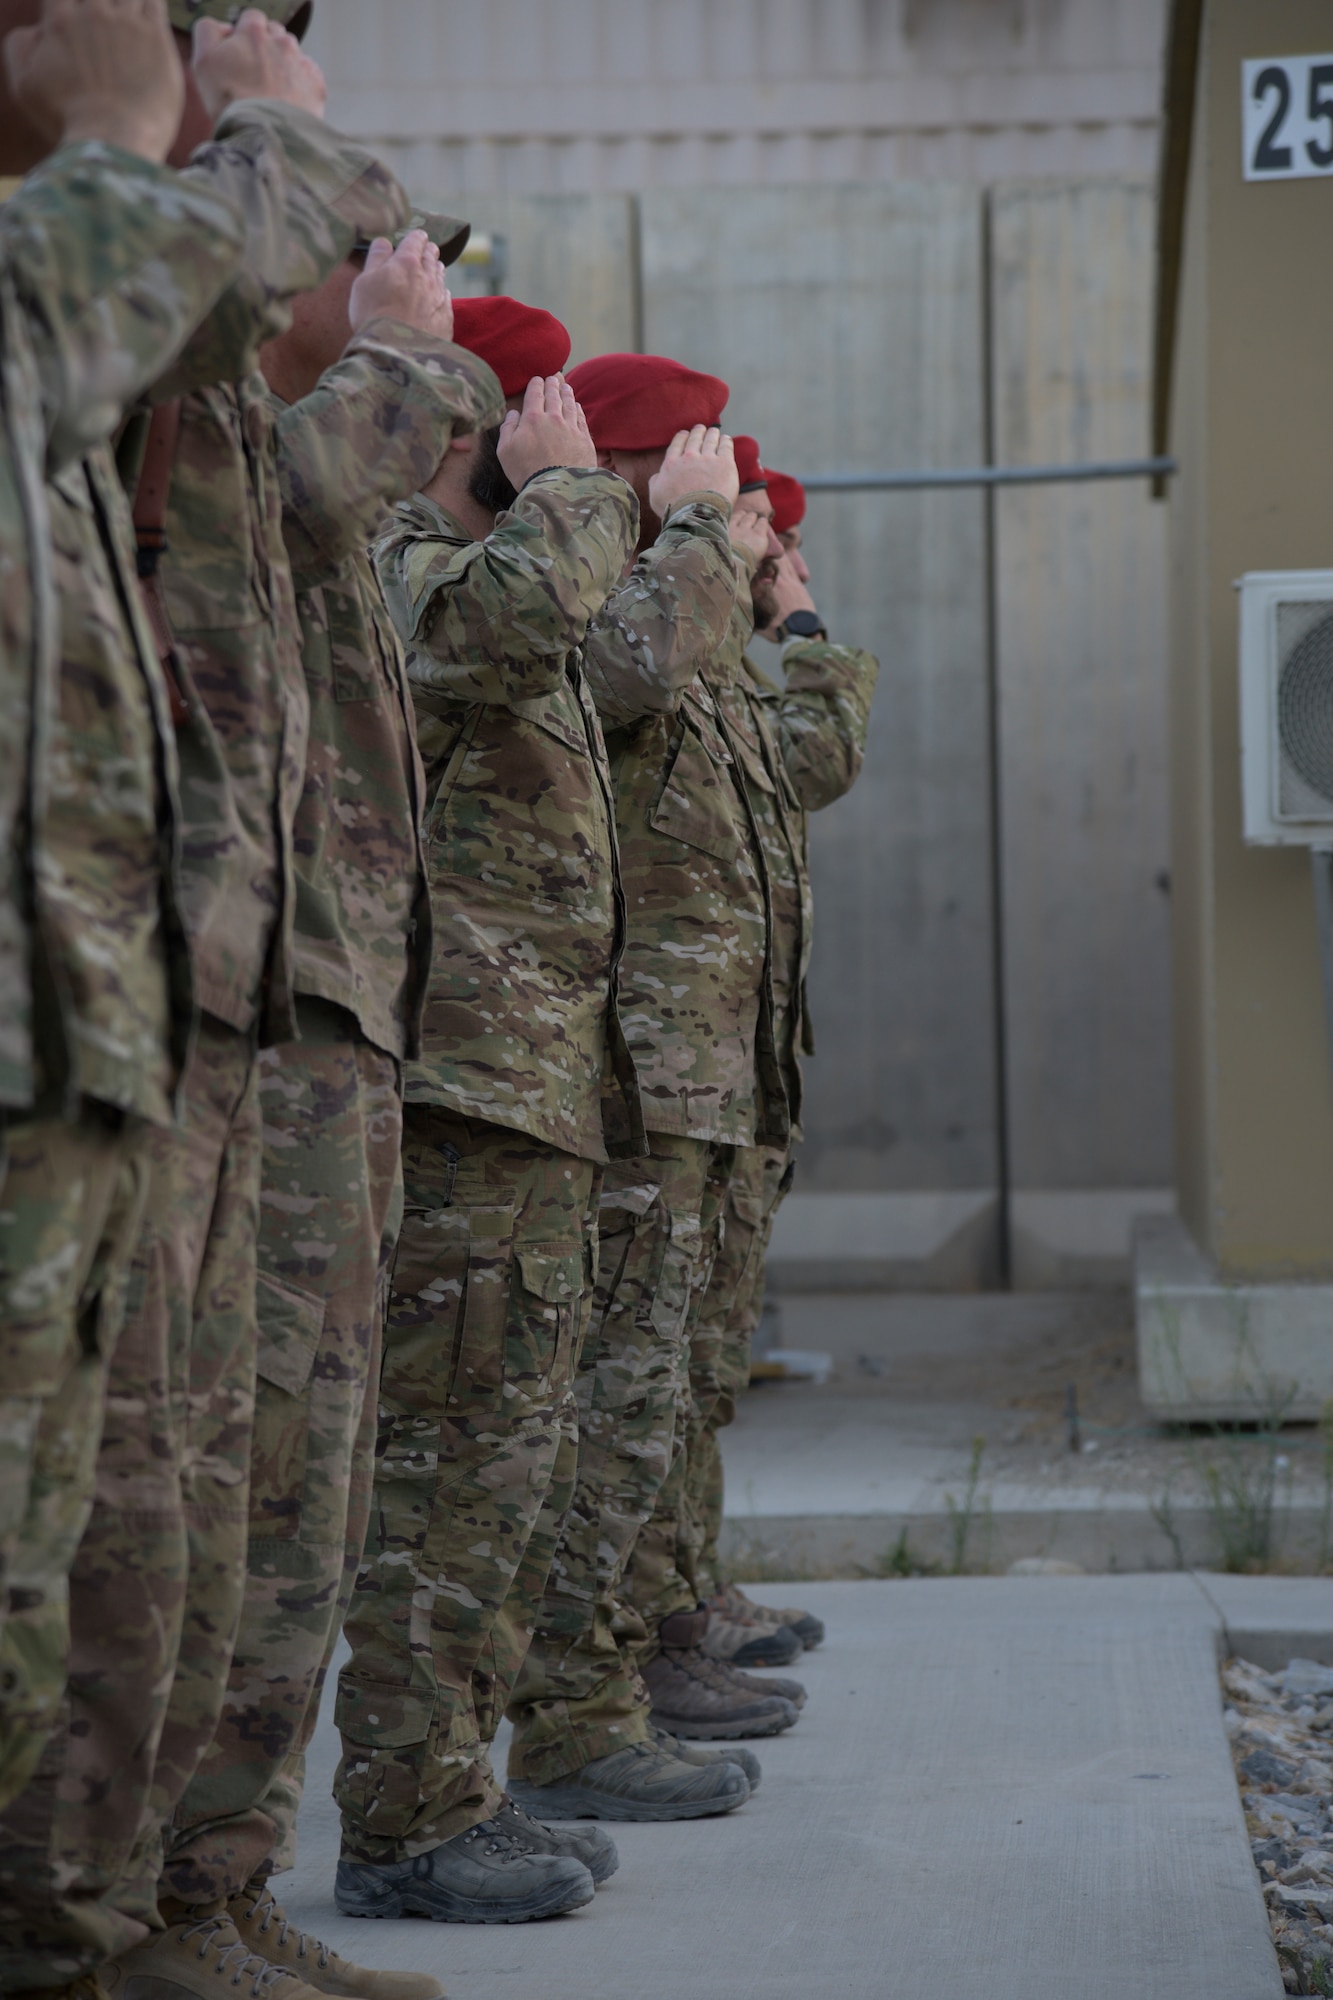 BAGRAM AIRFIELD, Afghanistan (August 28, 2018) -- Airmen salute during the Medal of Honor ceremony for U.S. Air Force Master Sgt. John Chapman on Bagram Airfield, Afghanistan, August 28, 2018. Chapman was posthumously awarded the MOH for his actions during the Battle of Takur Ghar, also known as Roberts Ridge, in Afghanistan in March 2002. (U.S. Air Force photo by Staff Sgt. Kristin High)